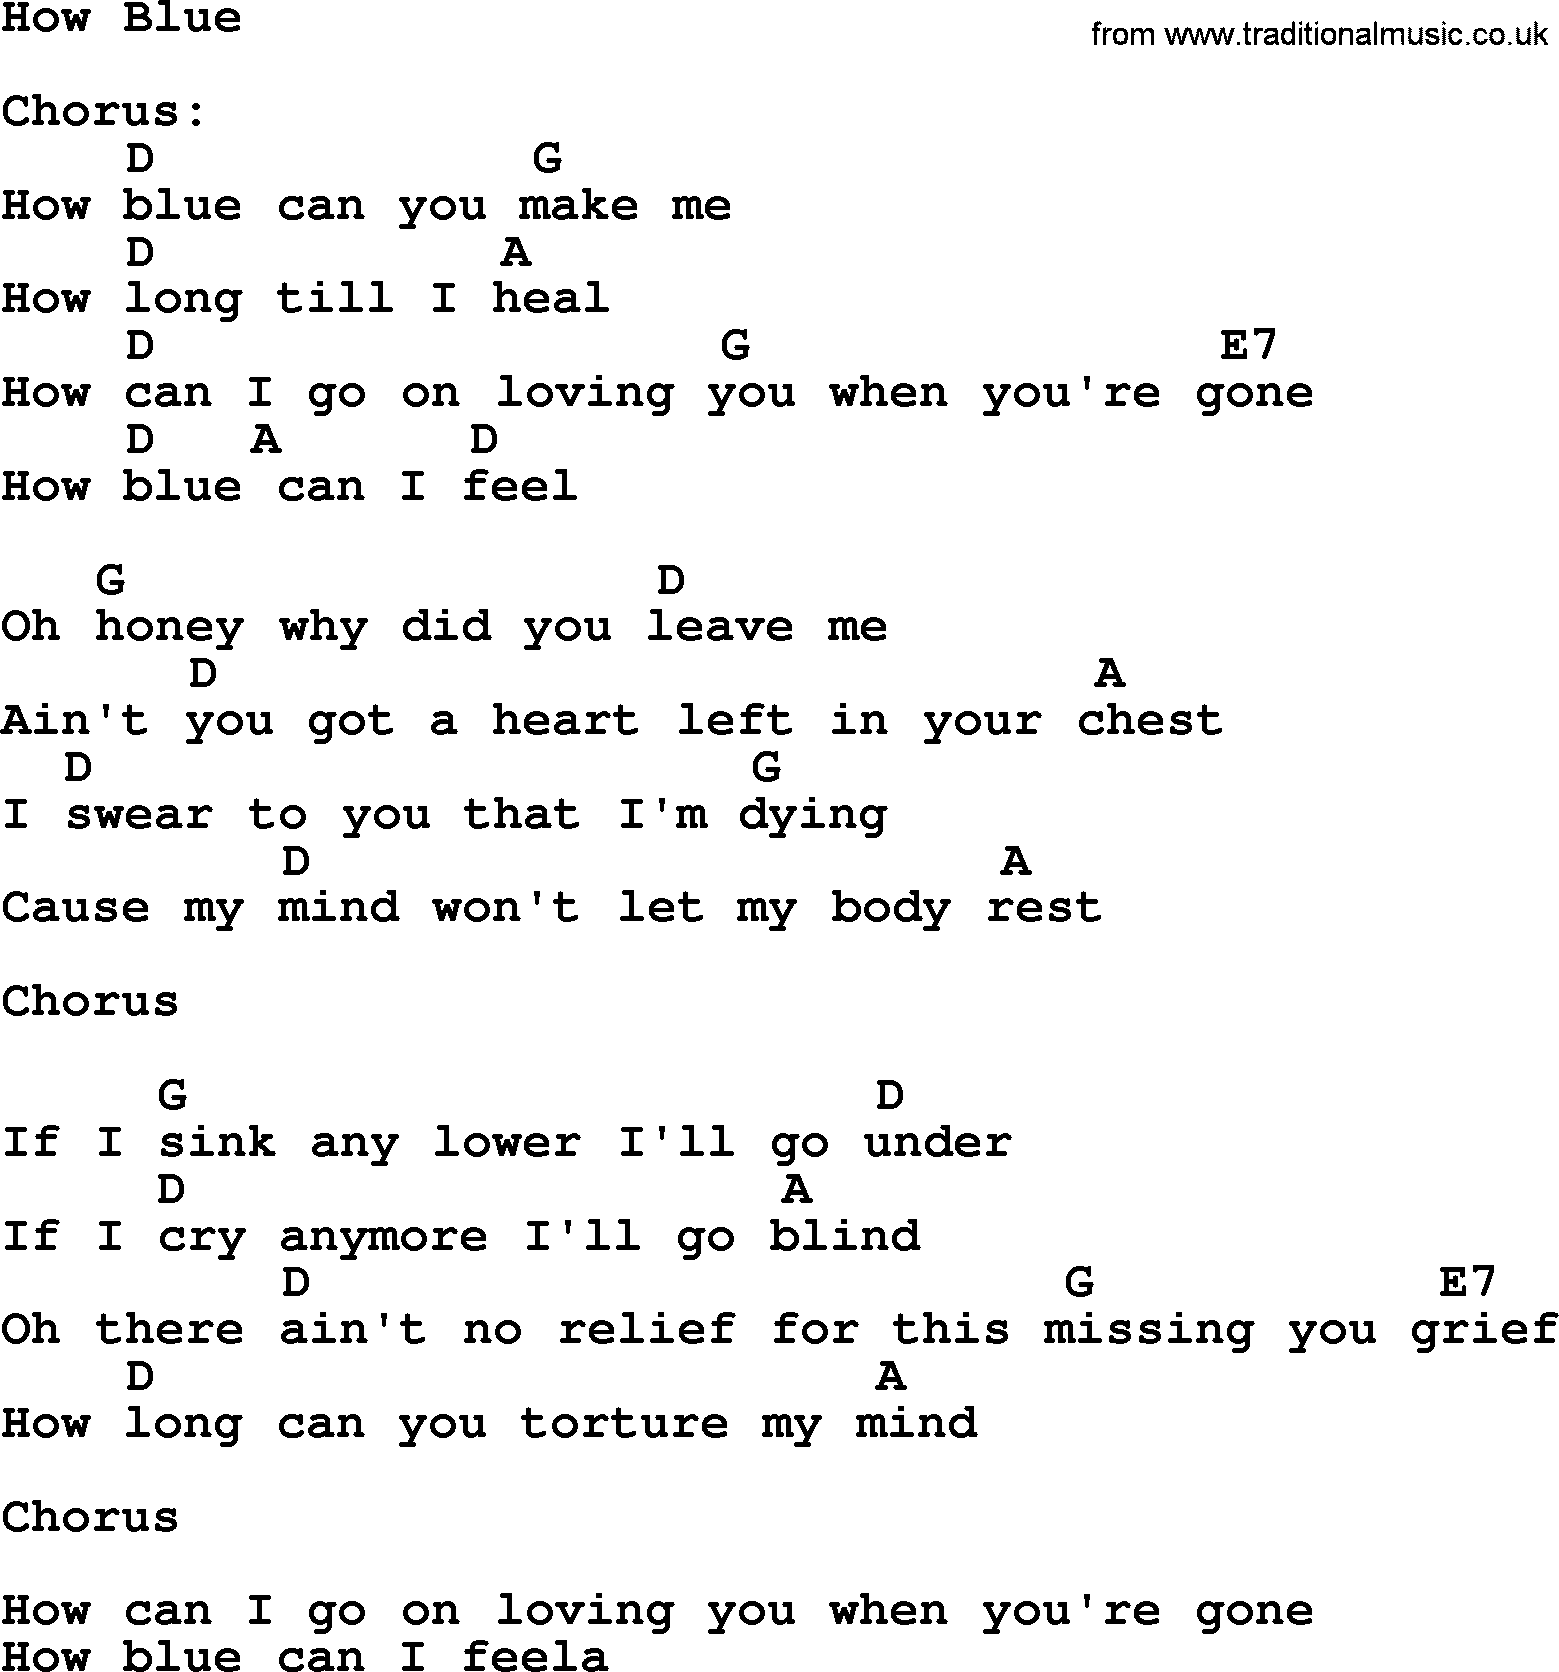 Reba McEntire song: How Blue, lyrics and chords